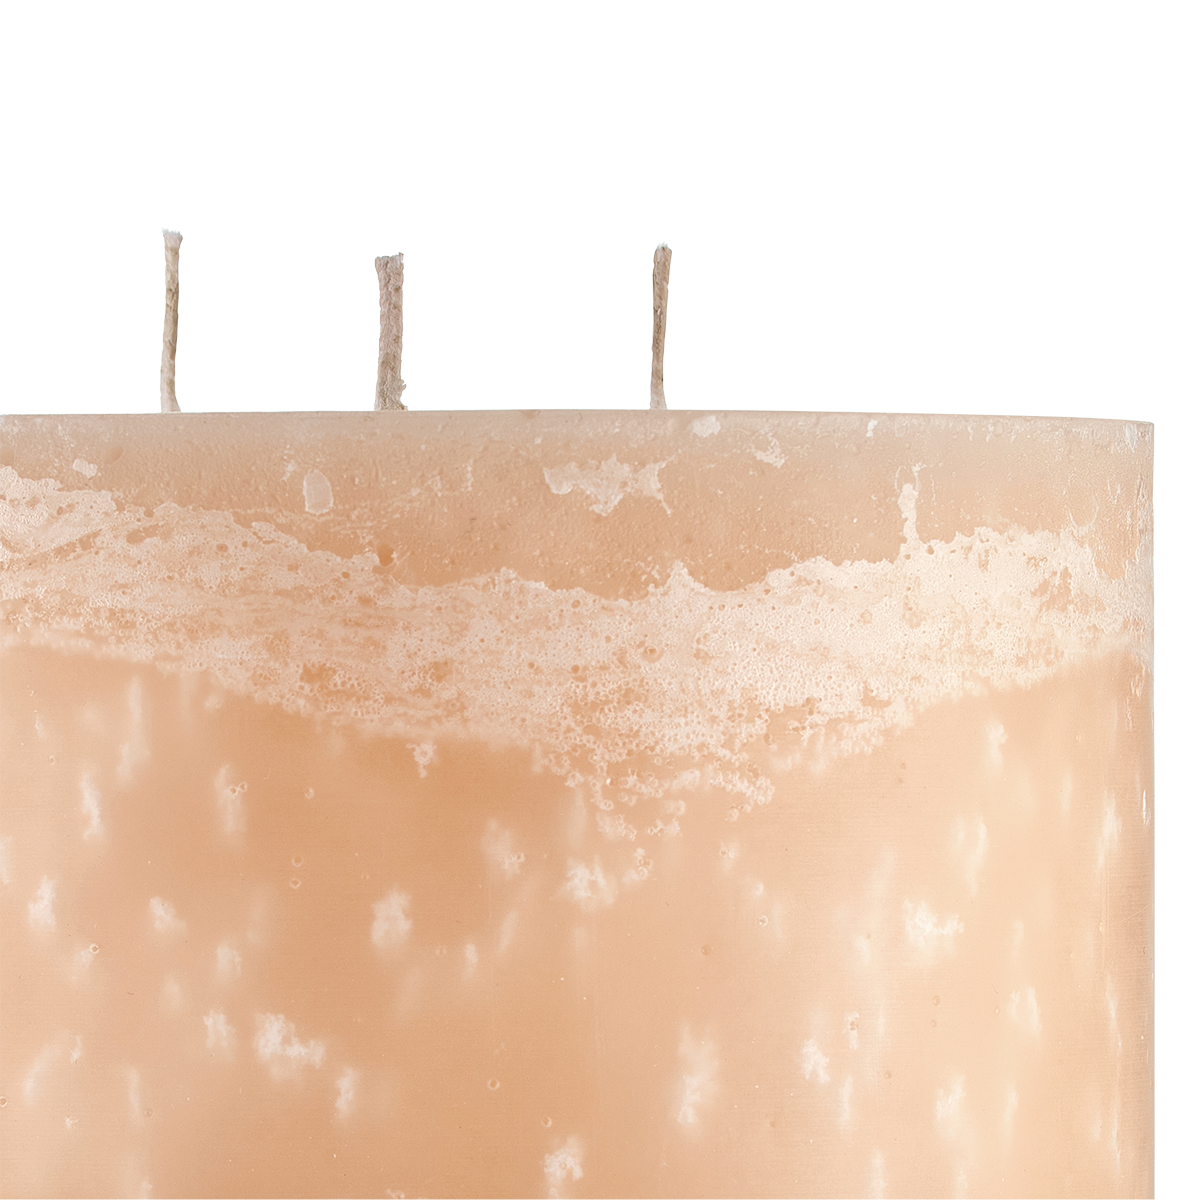 Blonde Amber & Honey 3 Wick Candle